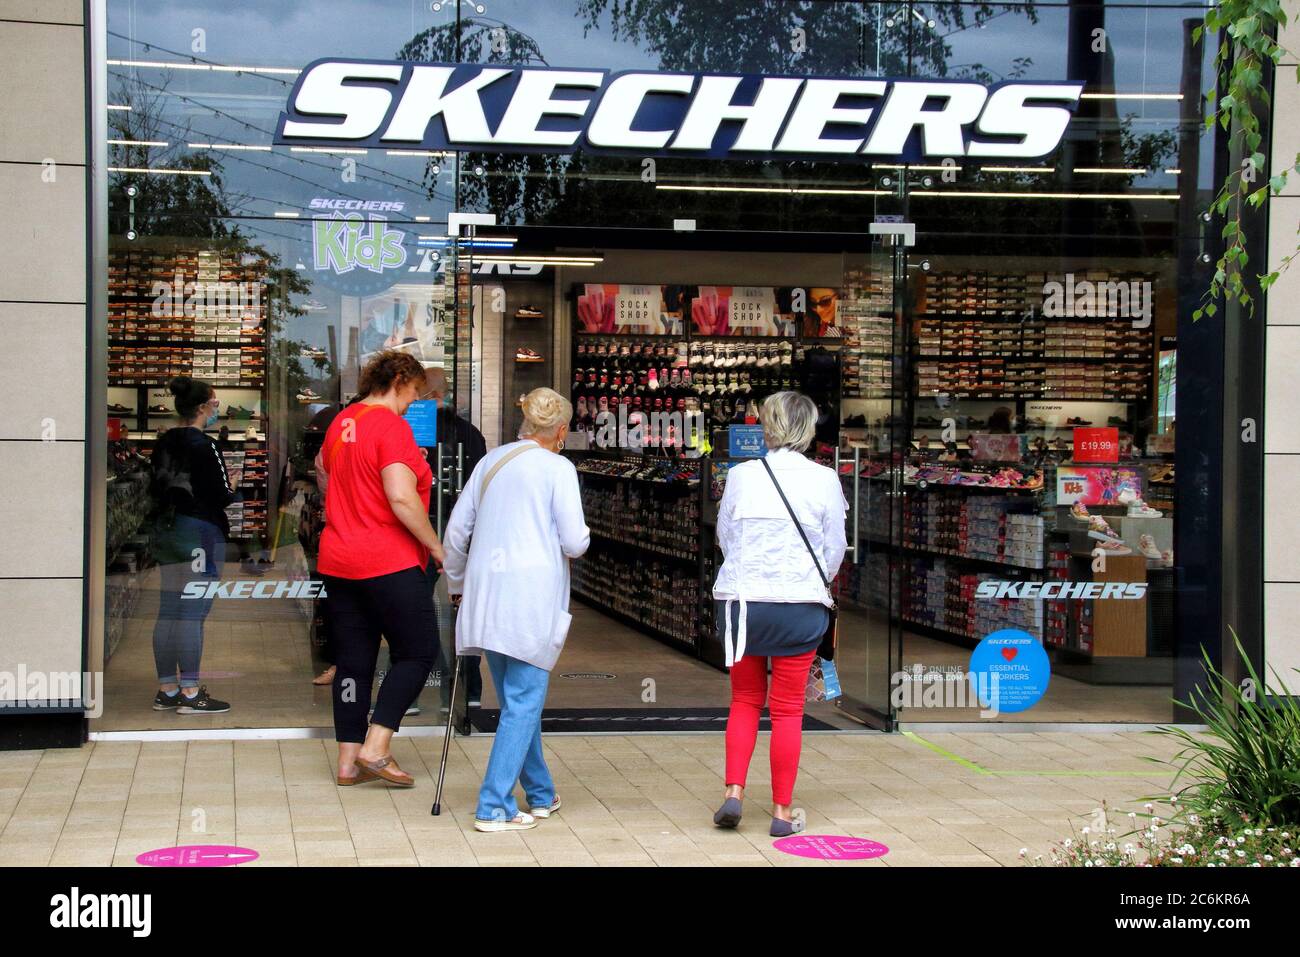 Skechers Logo High Resolution Stock Photography and Images - Alamy